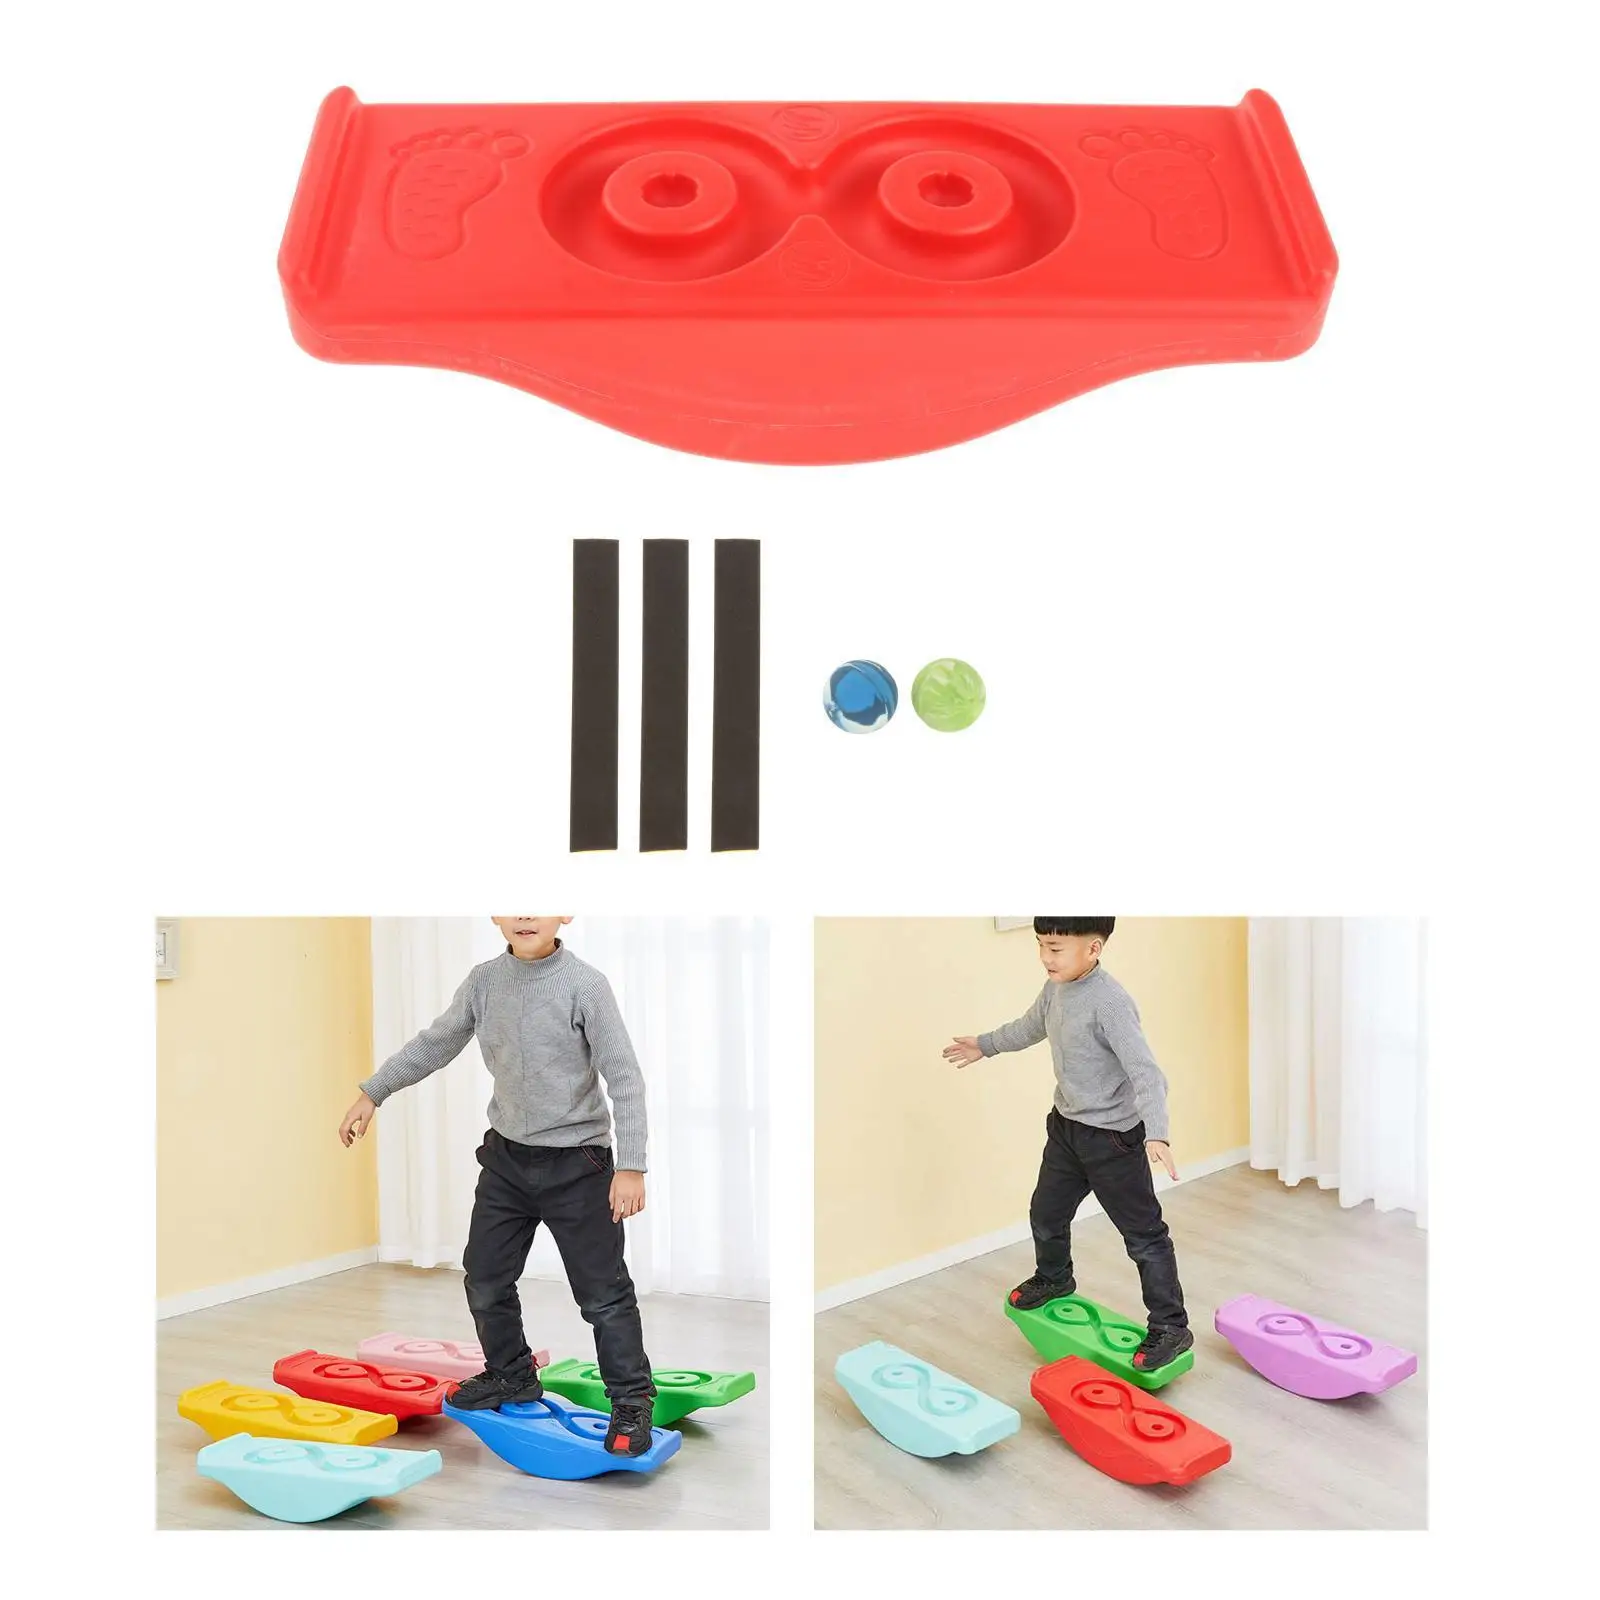 Balance Board Sensory Play Indoor Outdoor Games Rocking Seesaw Fitness Sport Stability Exercise Garden Kids Children Workout